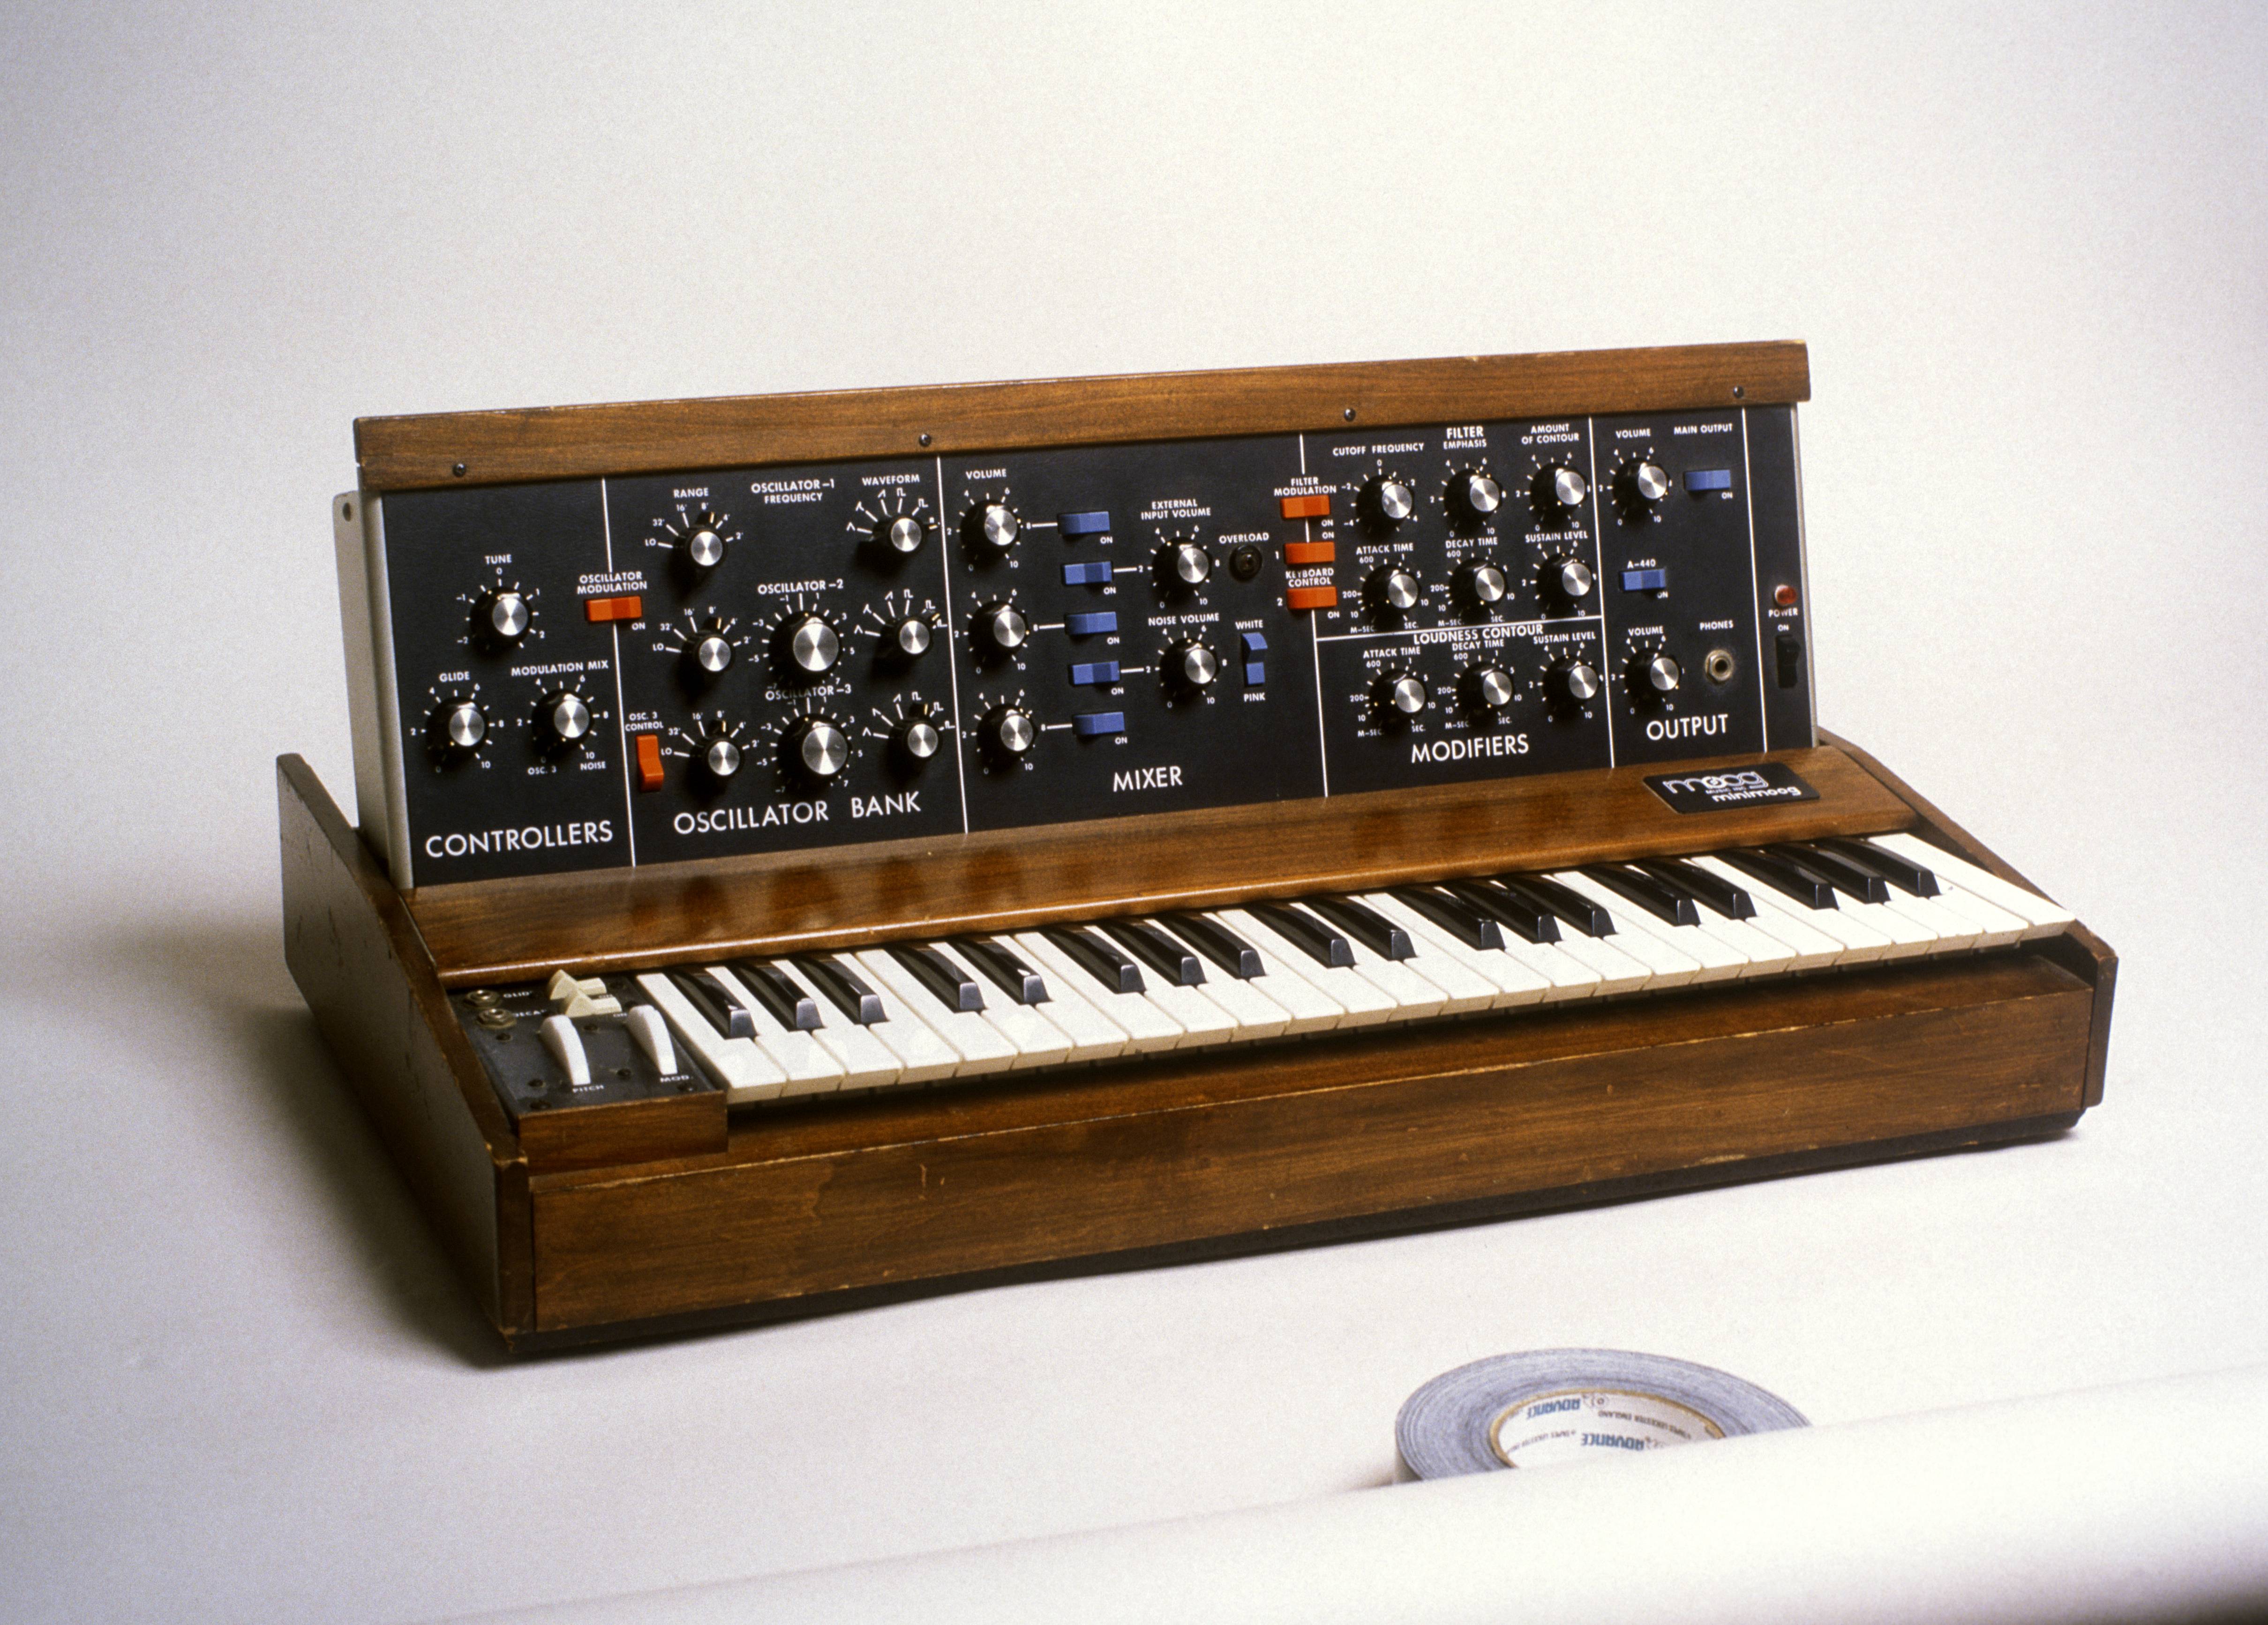 Robert Moog, Forefather of Synth, Inducted Into the National Inventors Hall of Fame 